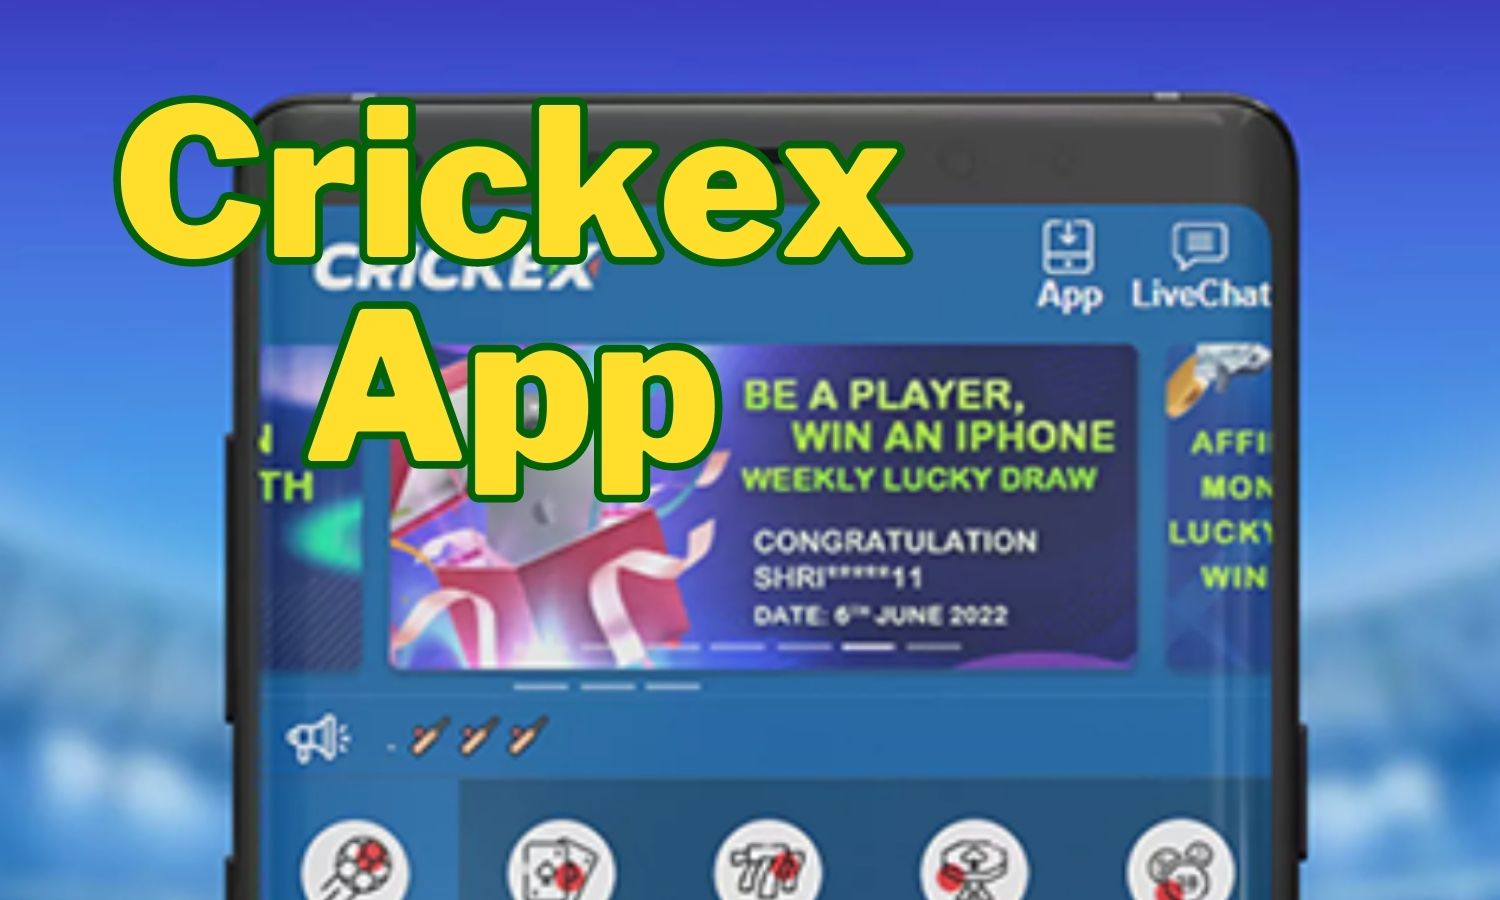 The Crickex India App details And Services